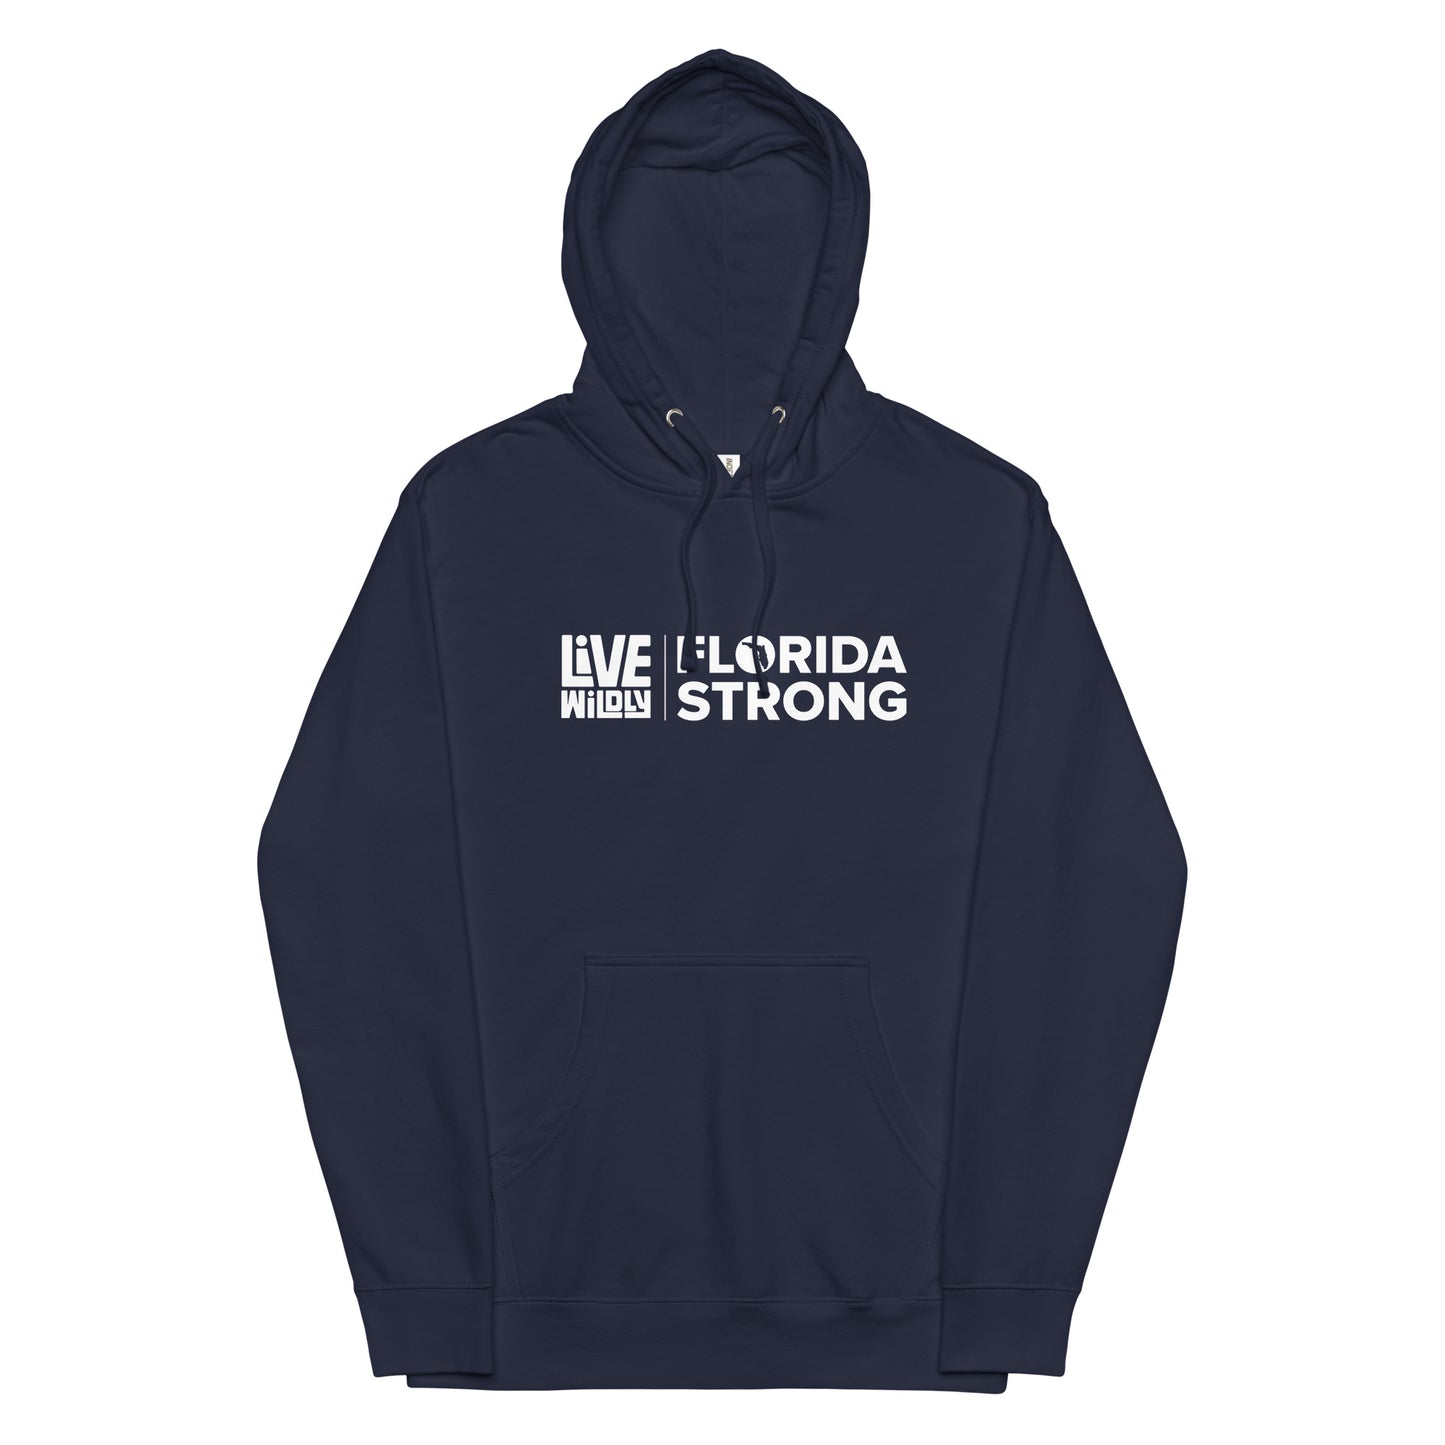 Florida Strong - Unisex Midweight Hoodie - Navy Front - Live Wildly 